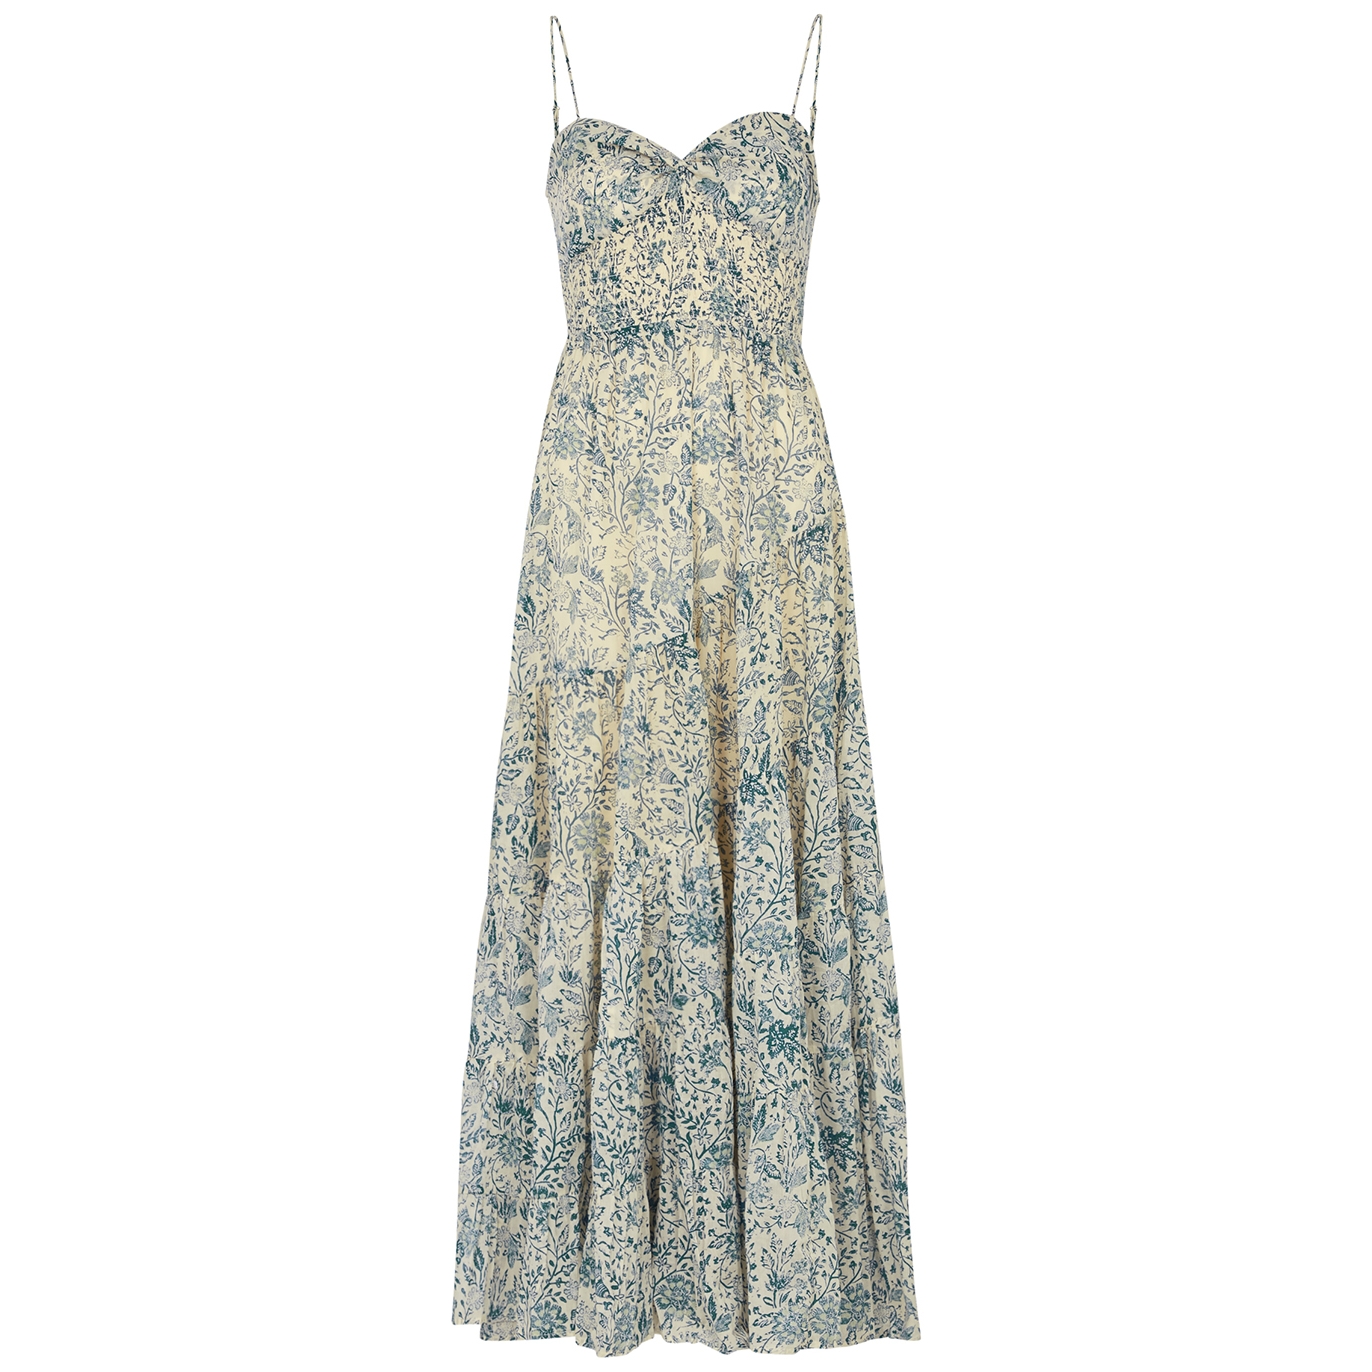 FREE PEOPLE SUNDRENCHED FLORAL-PRINT COTTON MAXI DRESS